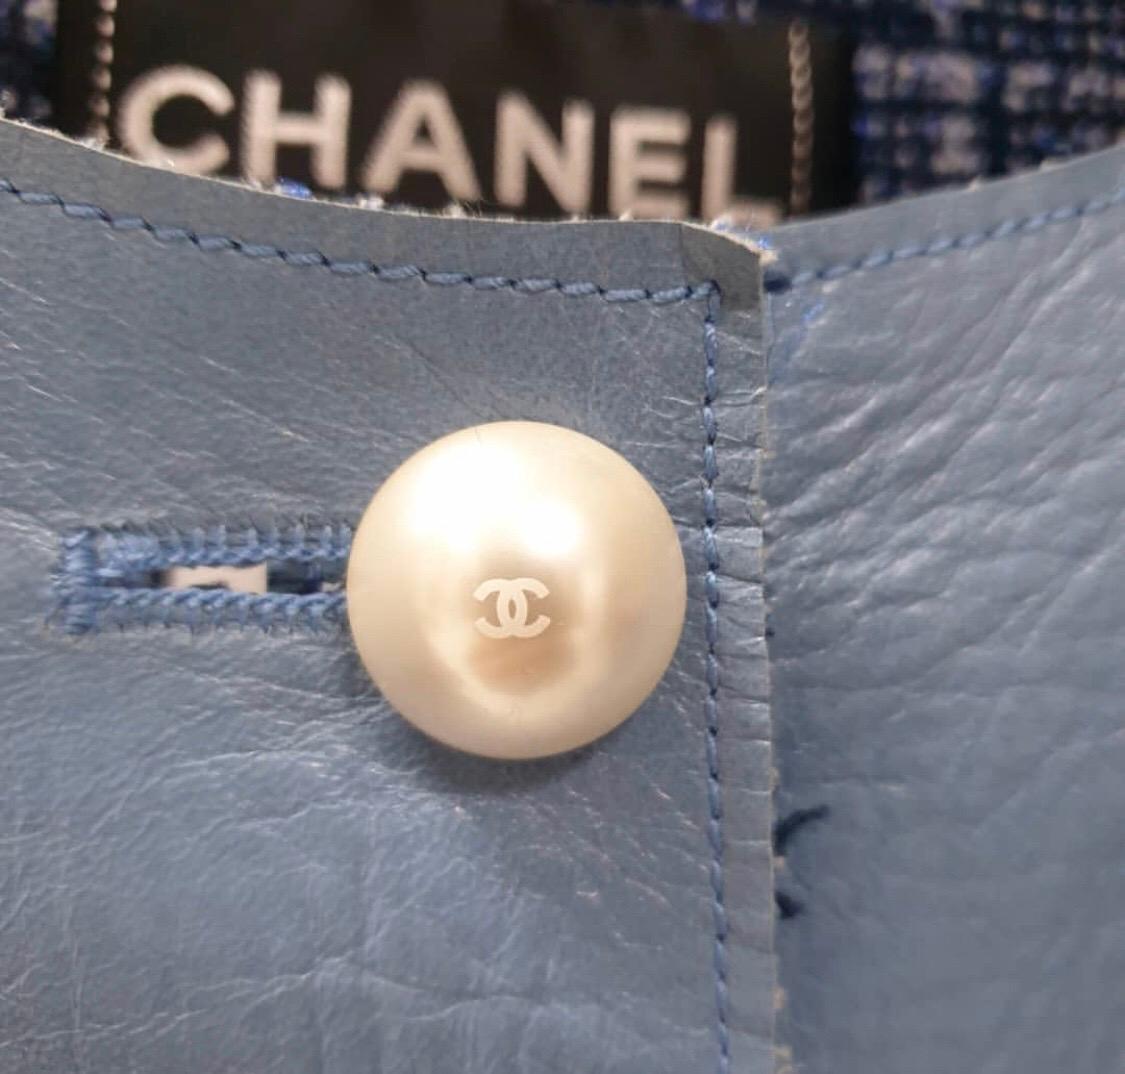 This evening jacket from Chanel in an blue tone is a must have piece in your closet. Crafted out of lambskin leather and lined with soft wool blends, this jacket has a contrast lined design. The pearl buttons further enhance the look of this